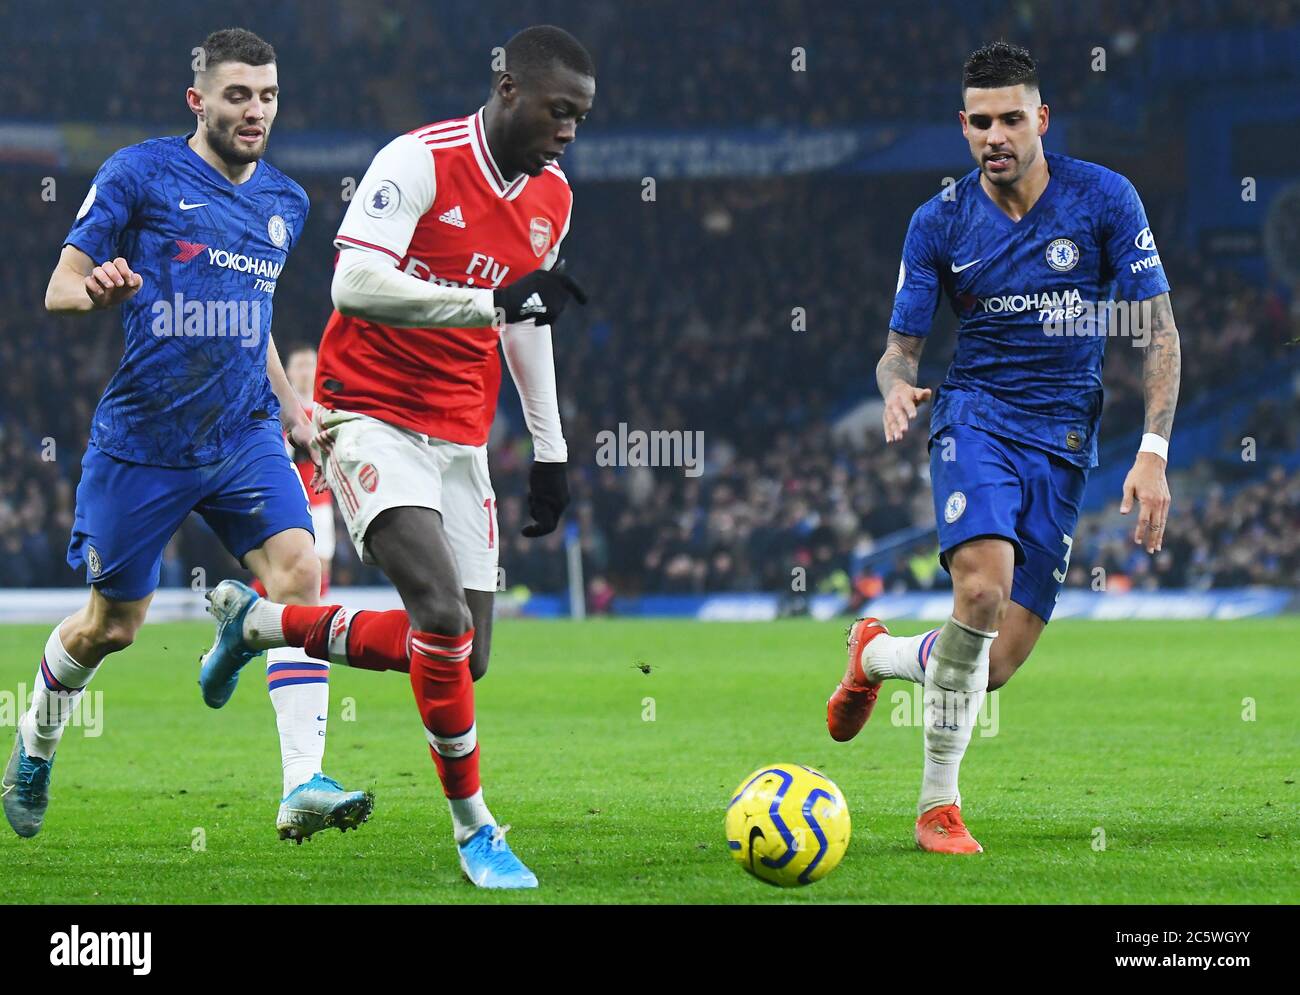 LONDON, ENGLAND - JANUARY 21, 2020: Nicolas Pepe of Arsenal pictured during the 2019/20 Premier League game between Chelsea FC and Arsenal FC at Stamford Bridge. Stock Photo